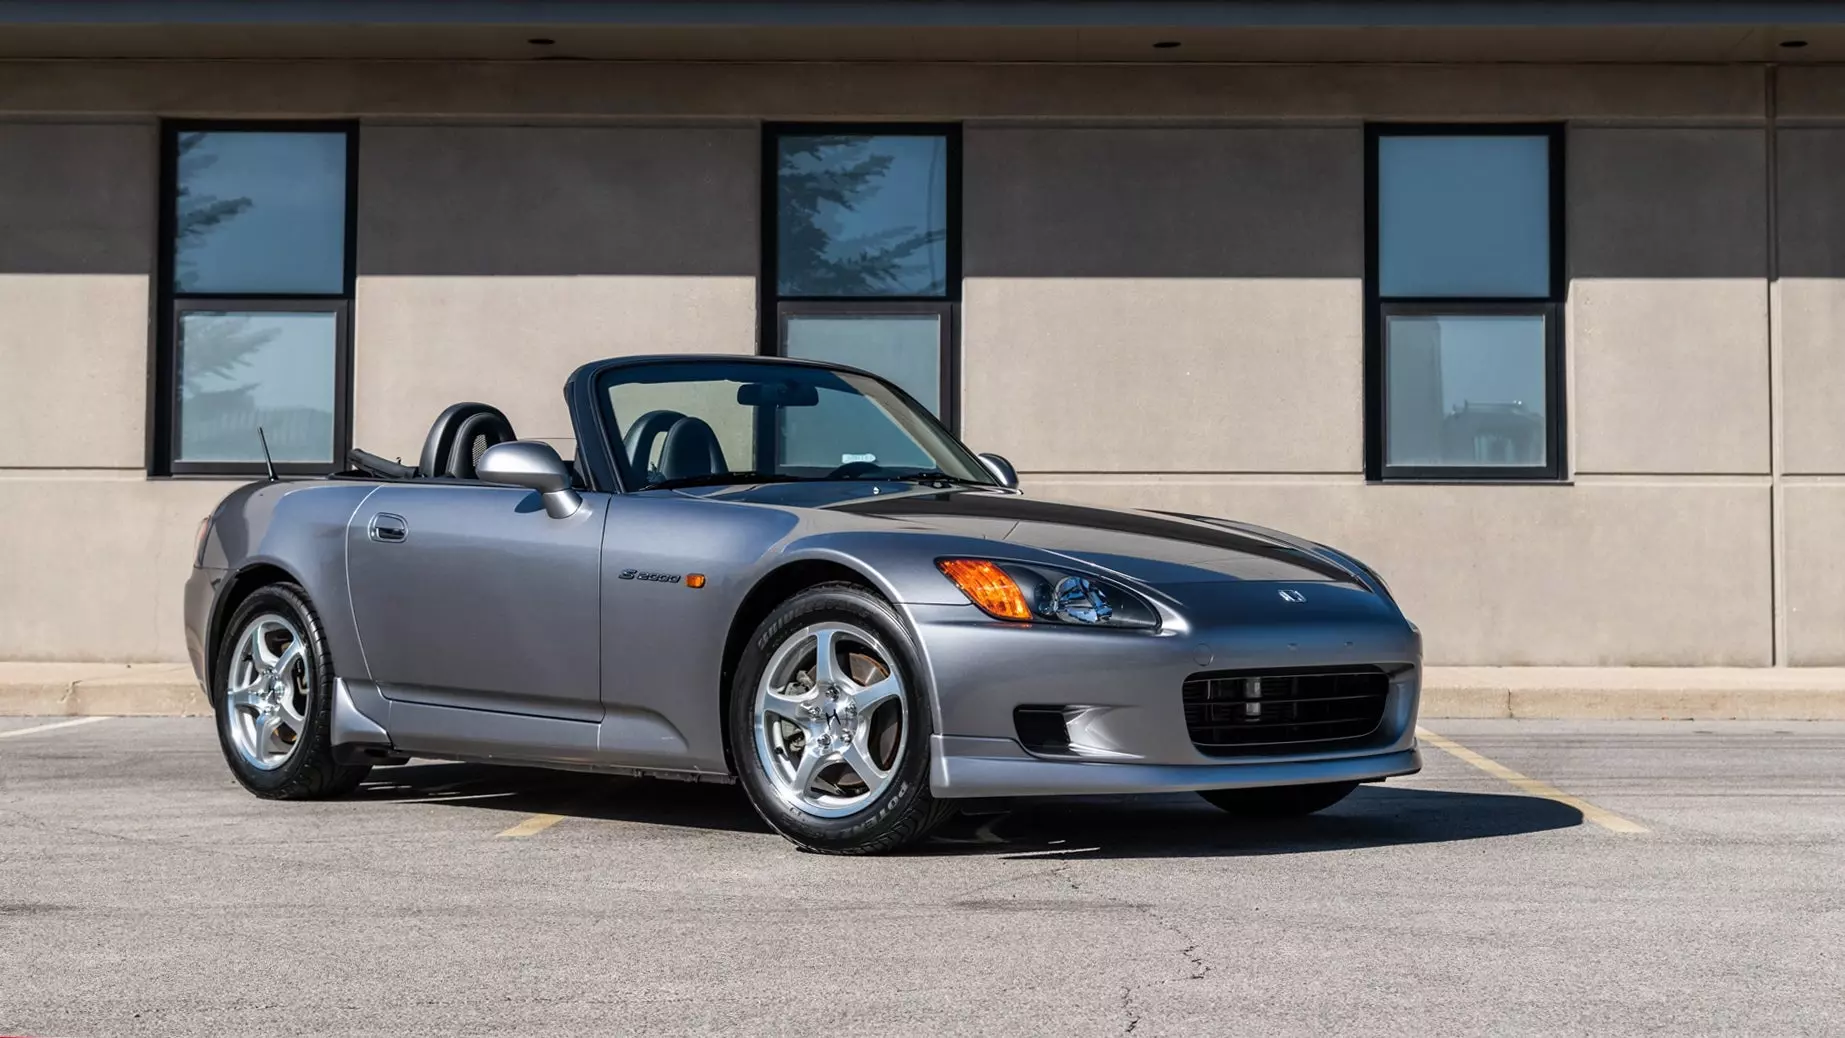 Please Don’t Hoard the S2000s